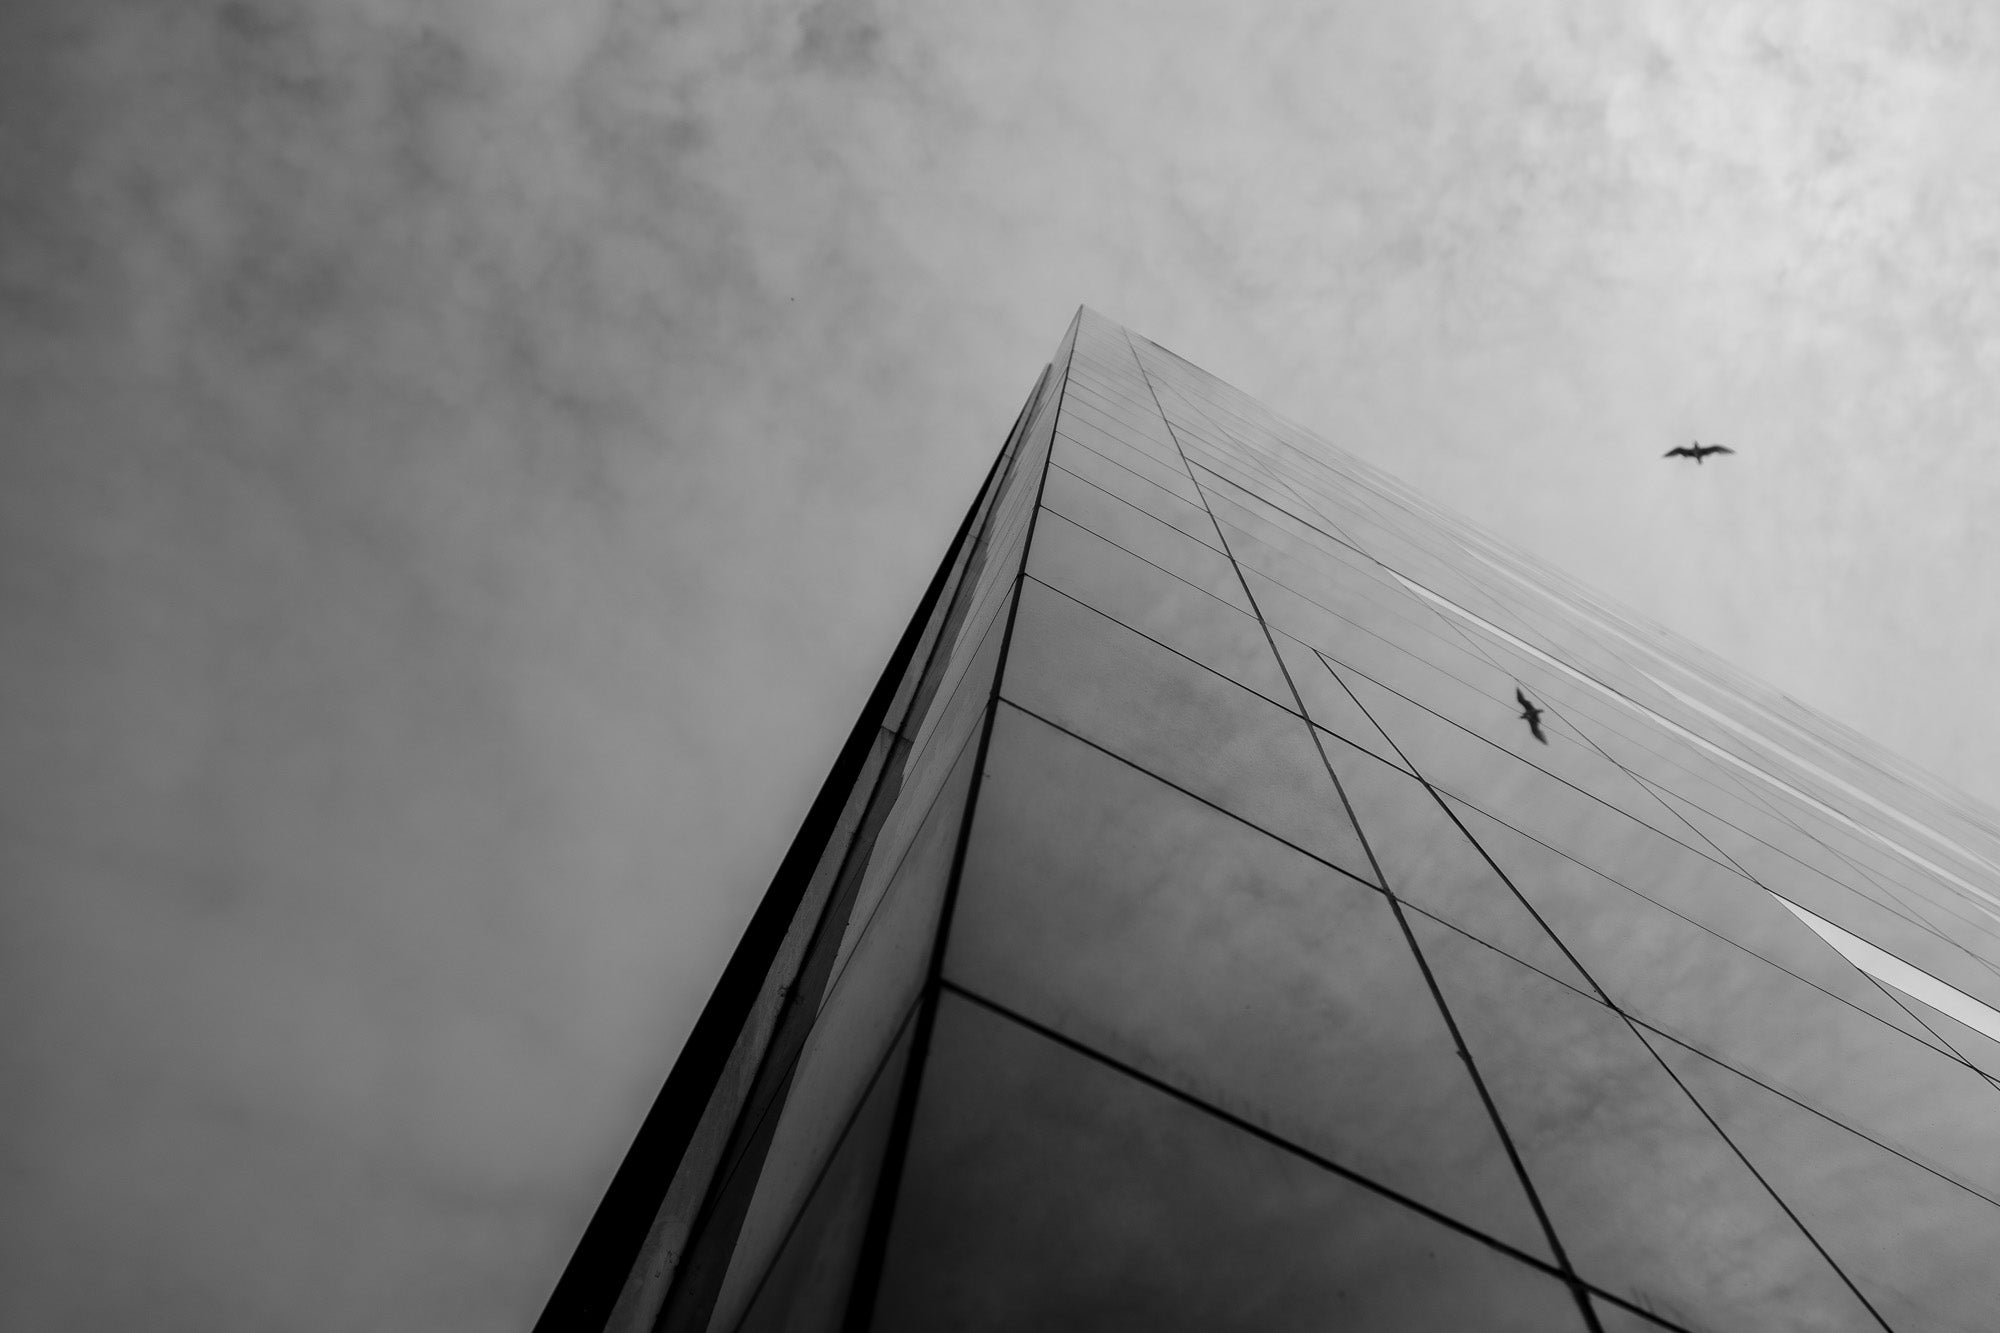 Black and white photograph of the BLOX building in Copenhagen with a bird flying overhead and reflections on the glass facade.